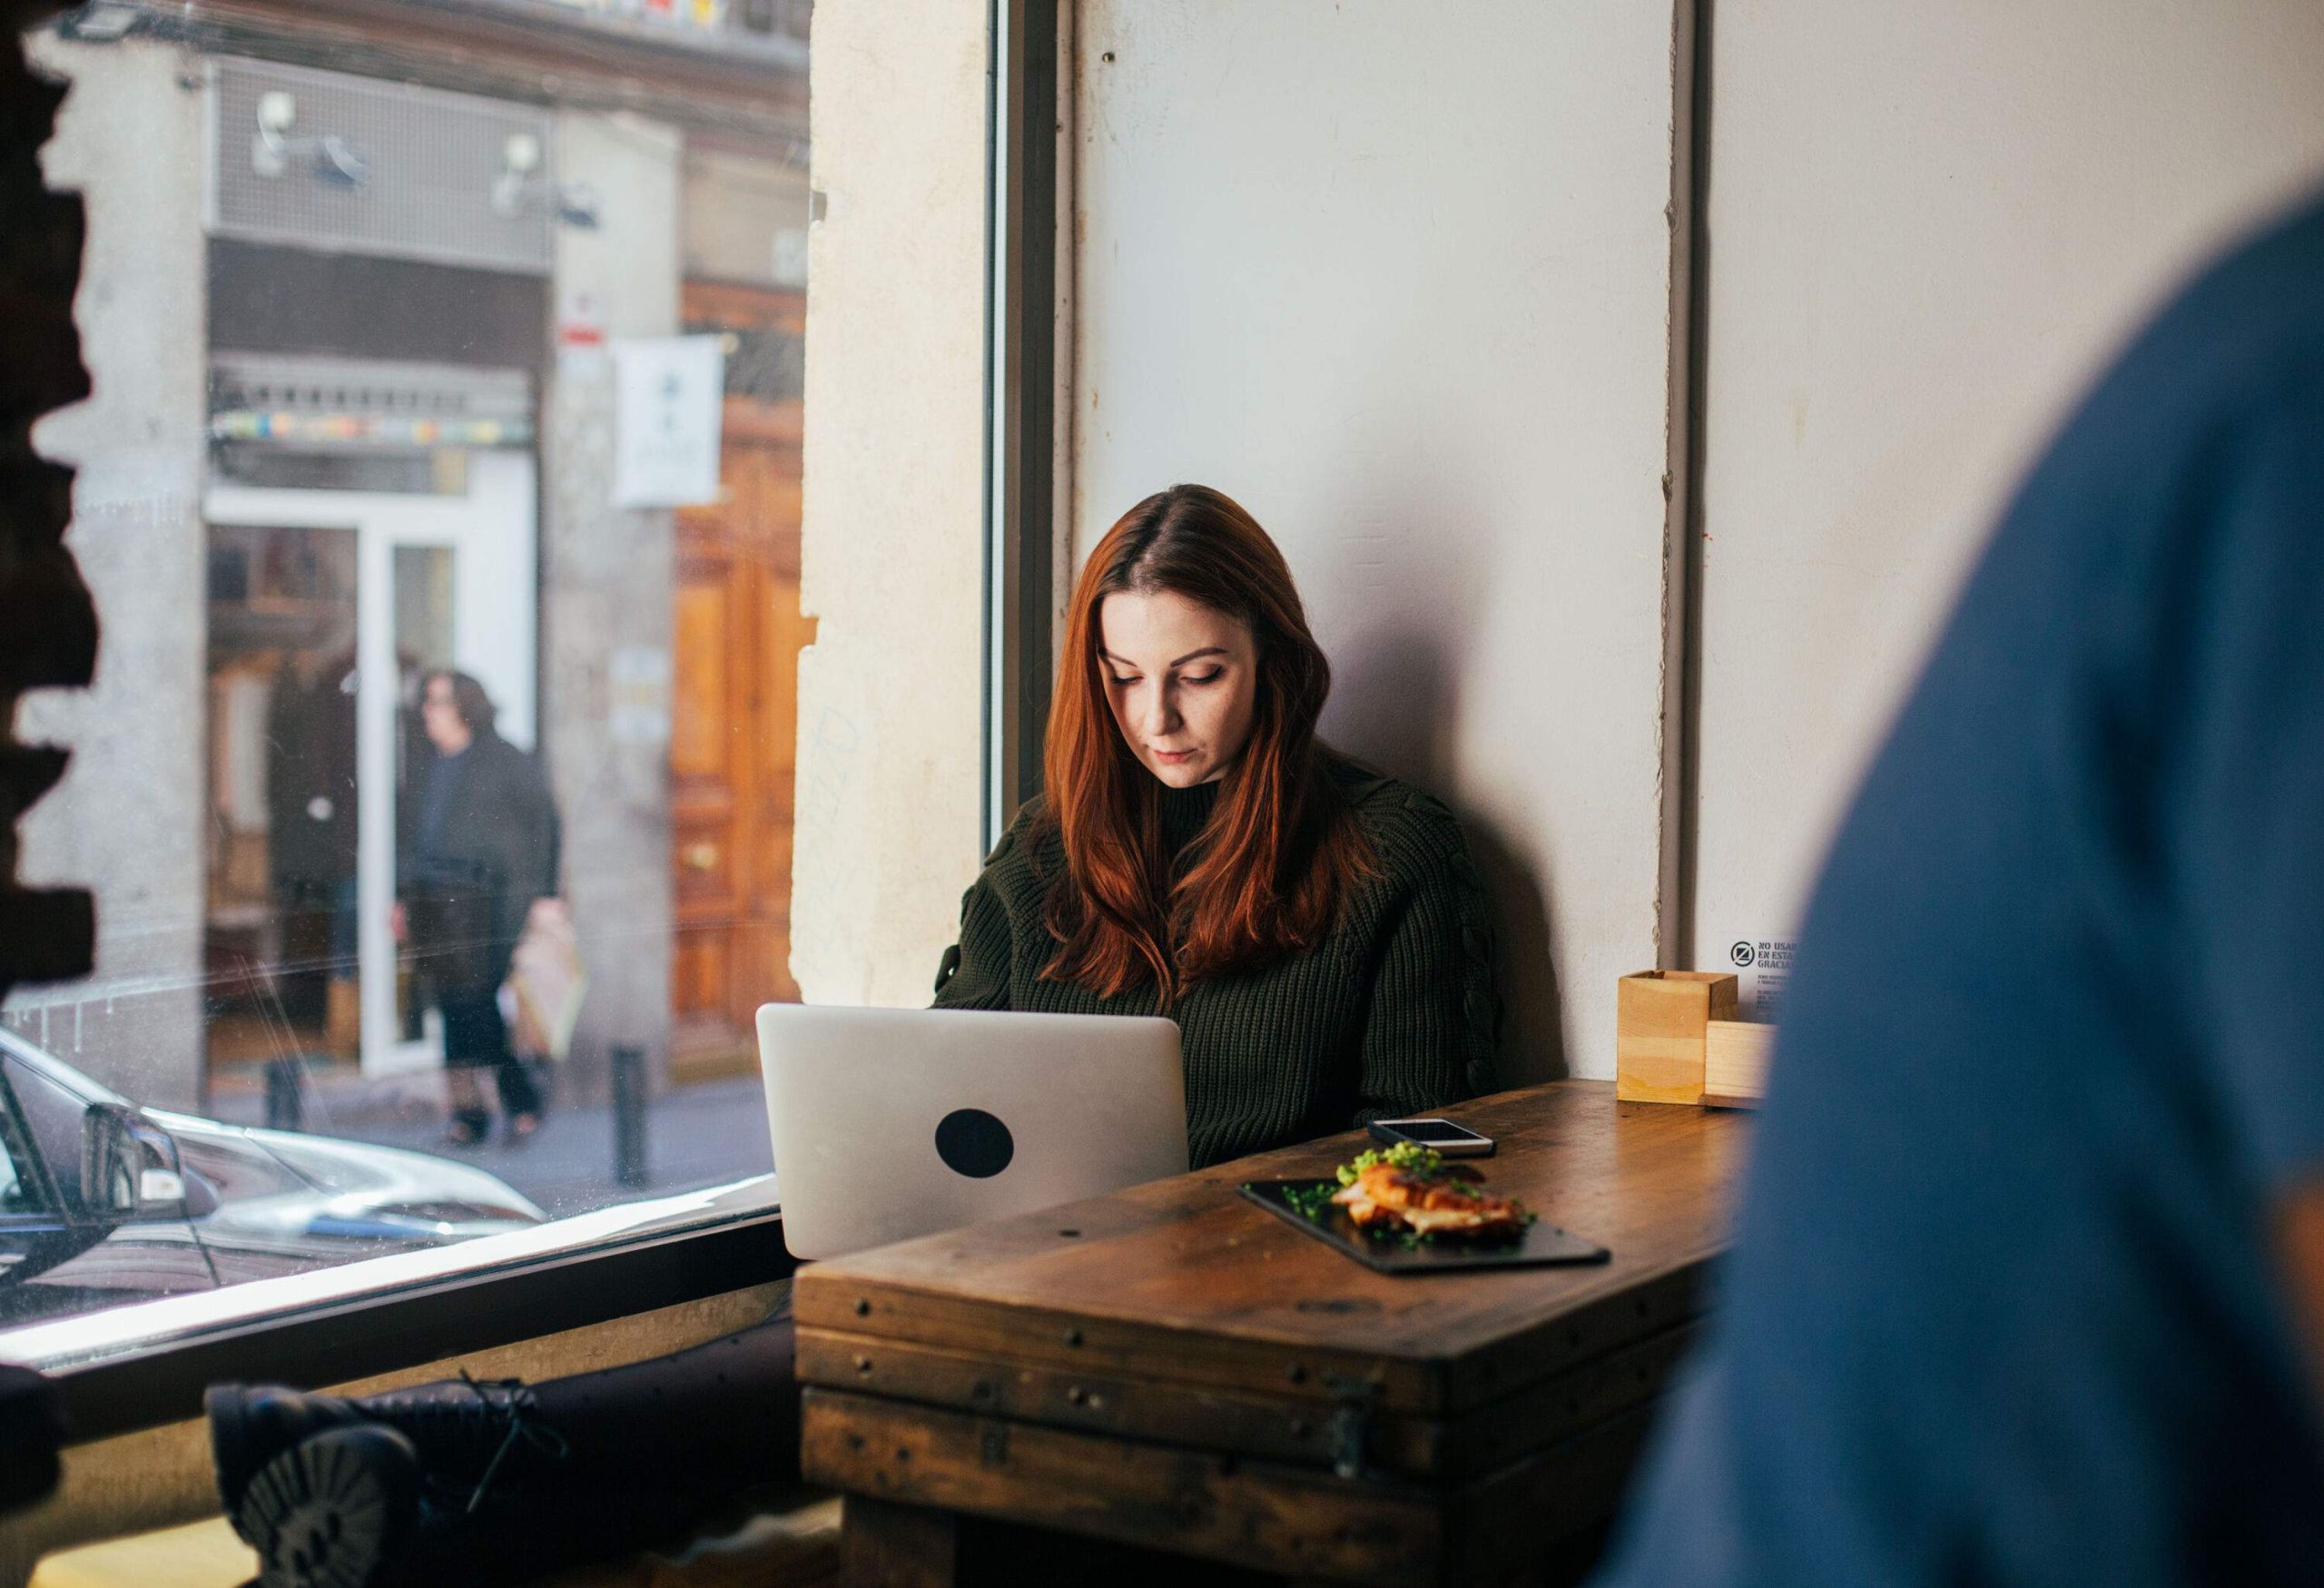 A long-haired lady sits comfortably near the big glass window working on her laptop in a cosy cafe.